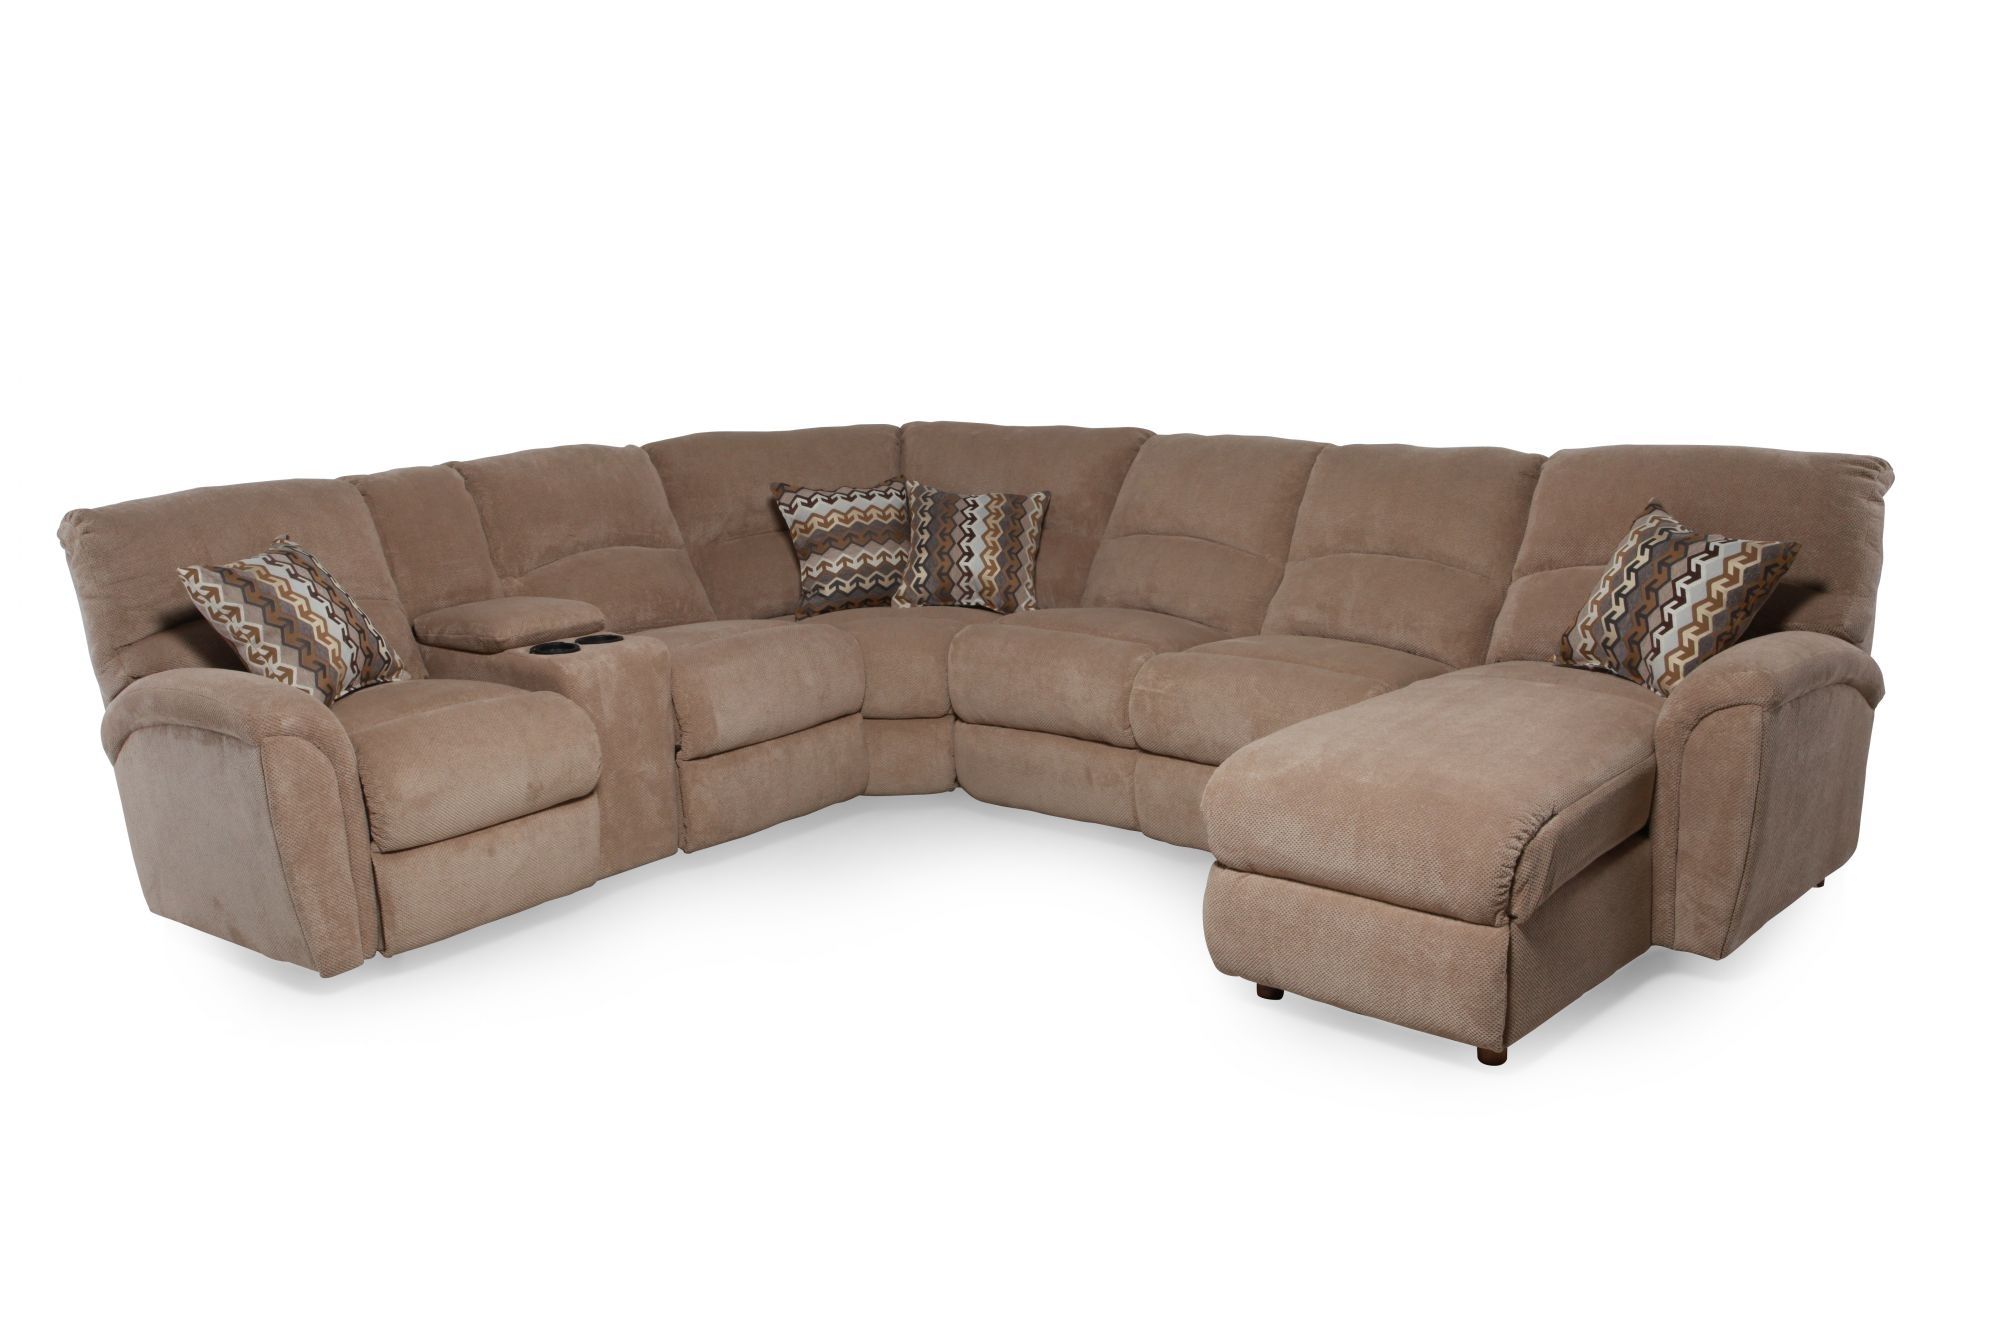 The Best Mathis Brothers Sectional Sofas